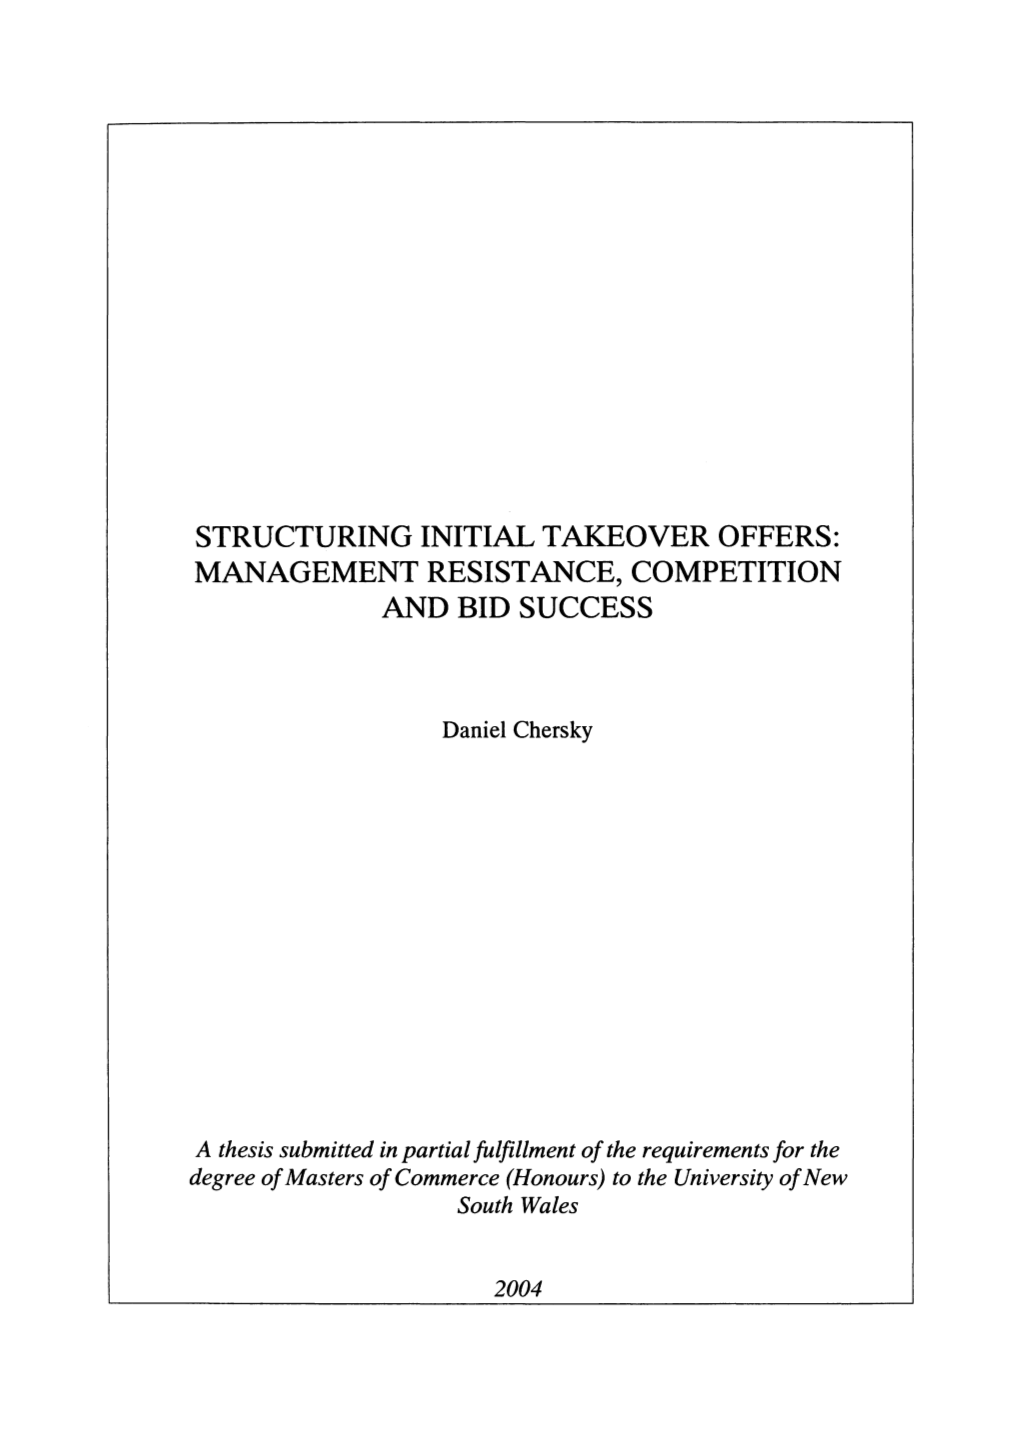 Structuring Initial Takeover Offers: Management Resistance, Competition and Bid Success